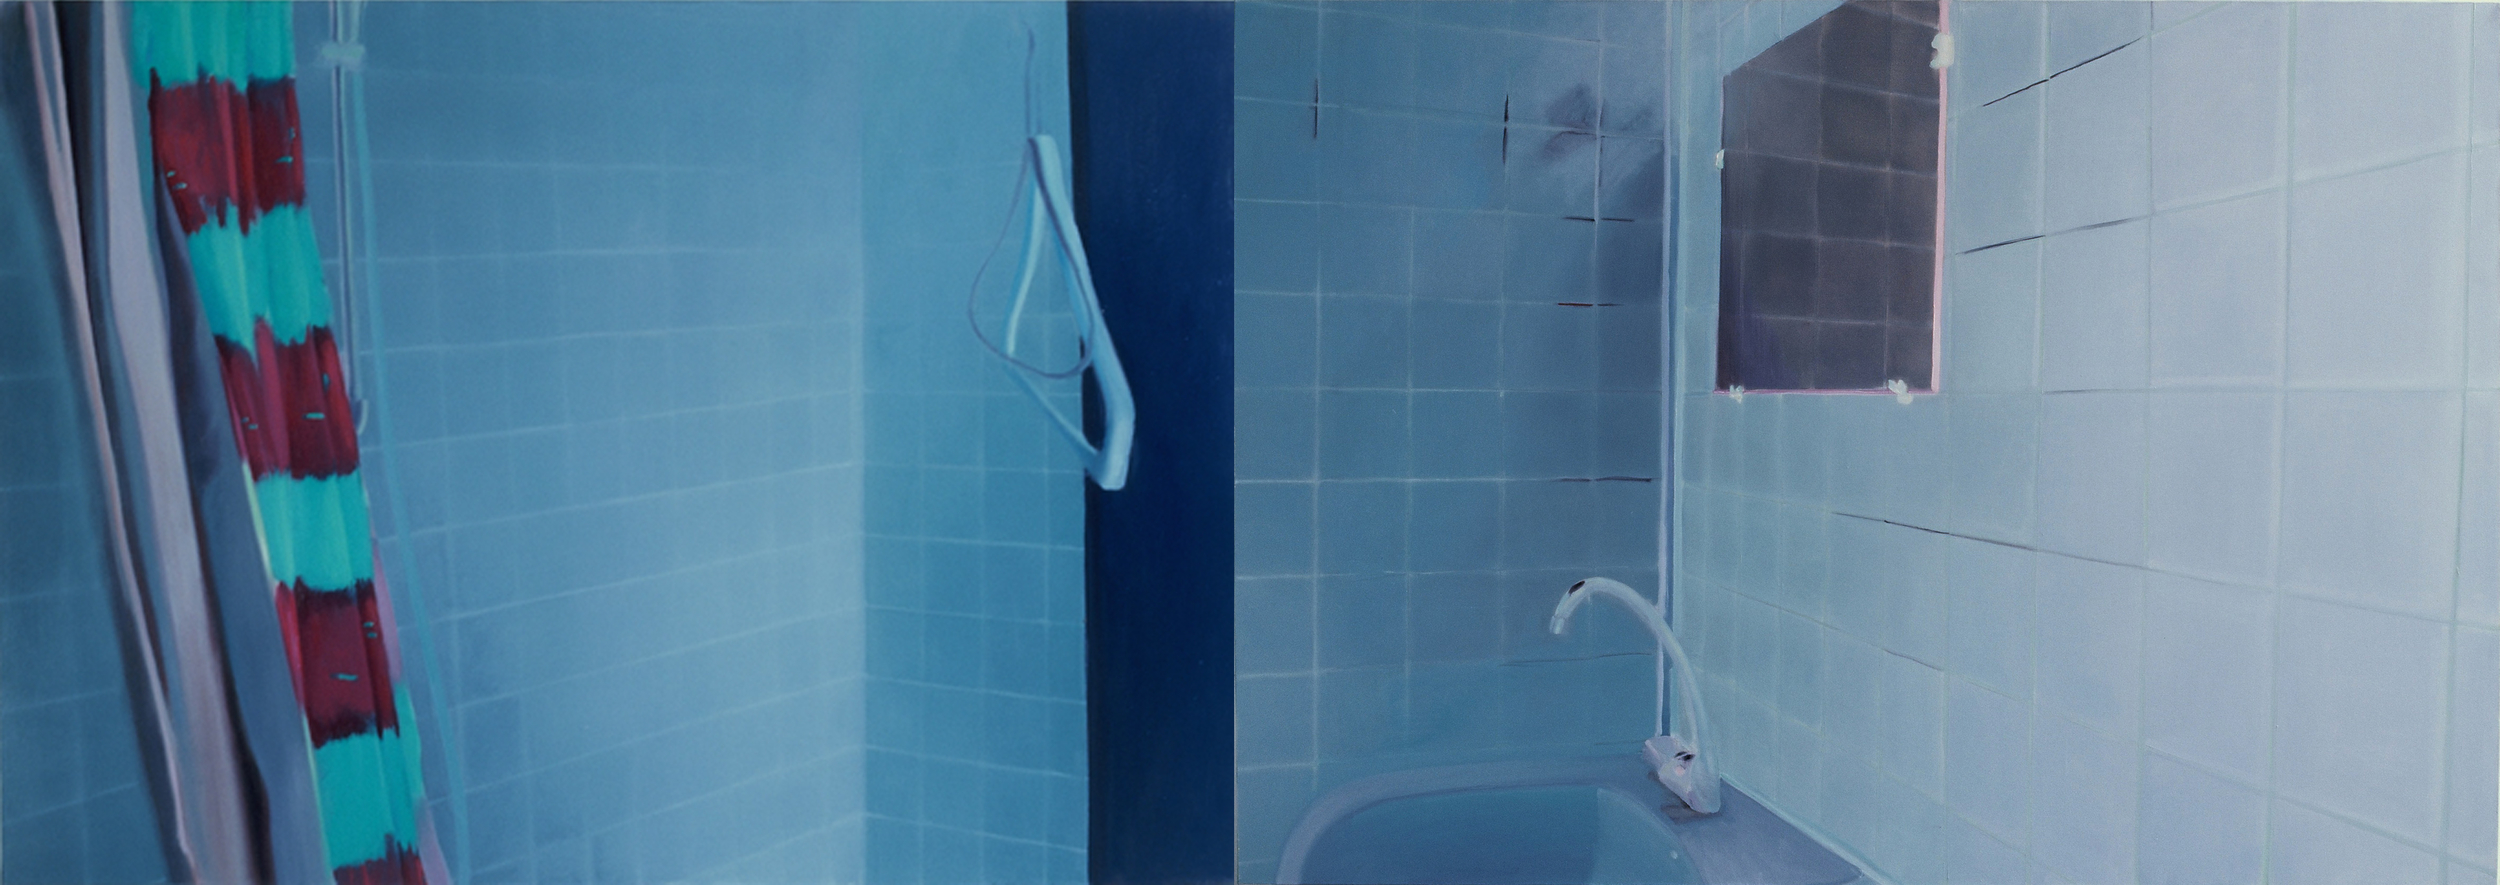   Untitled (bathroom,&nbsp;1st version) , 1999, oil on canvas, 96 x 324cm (diptych). Private collection, France 